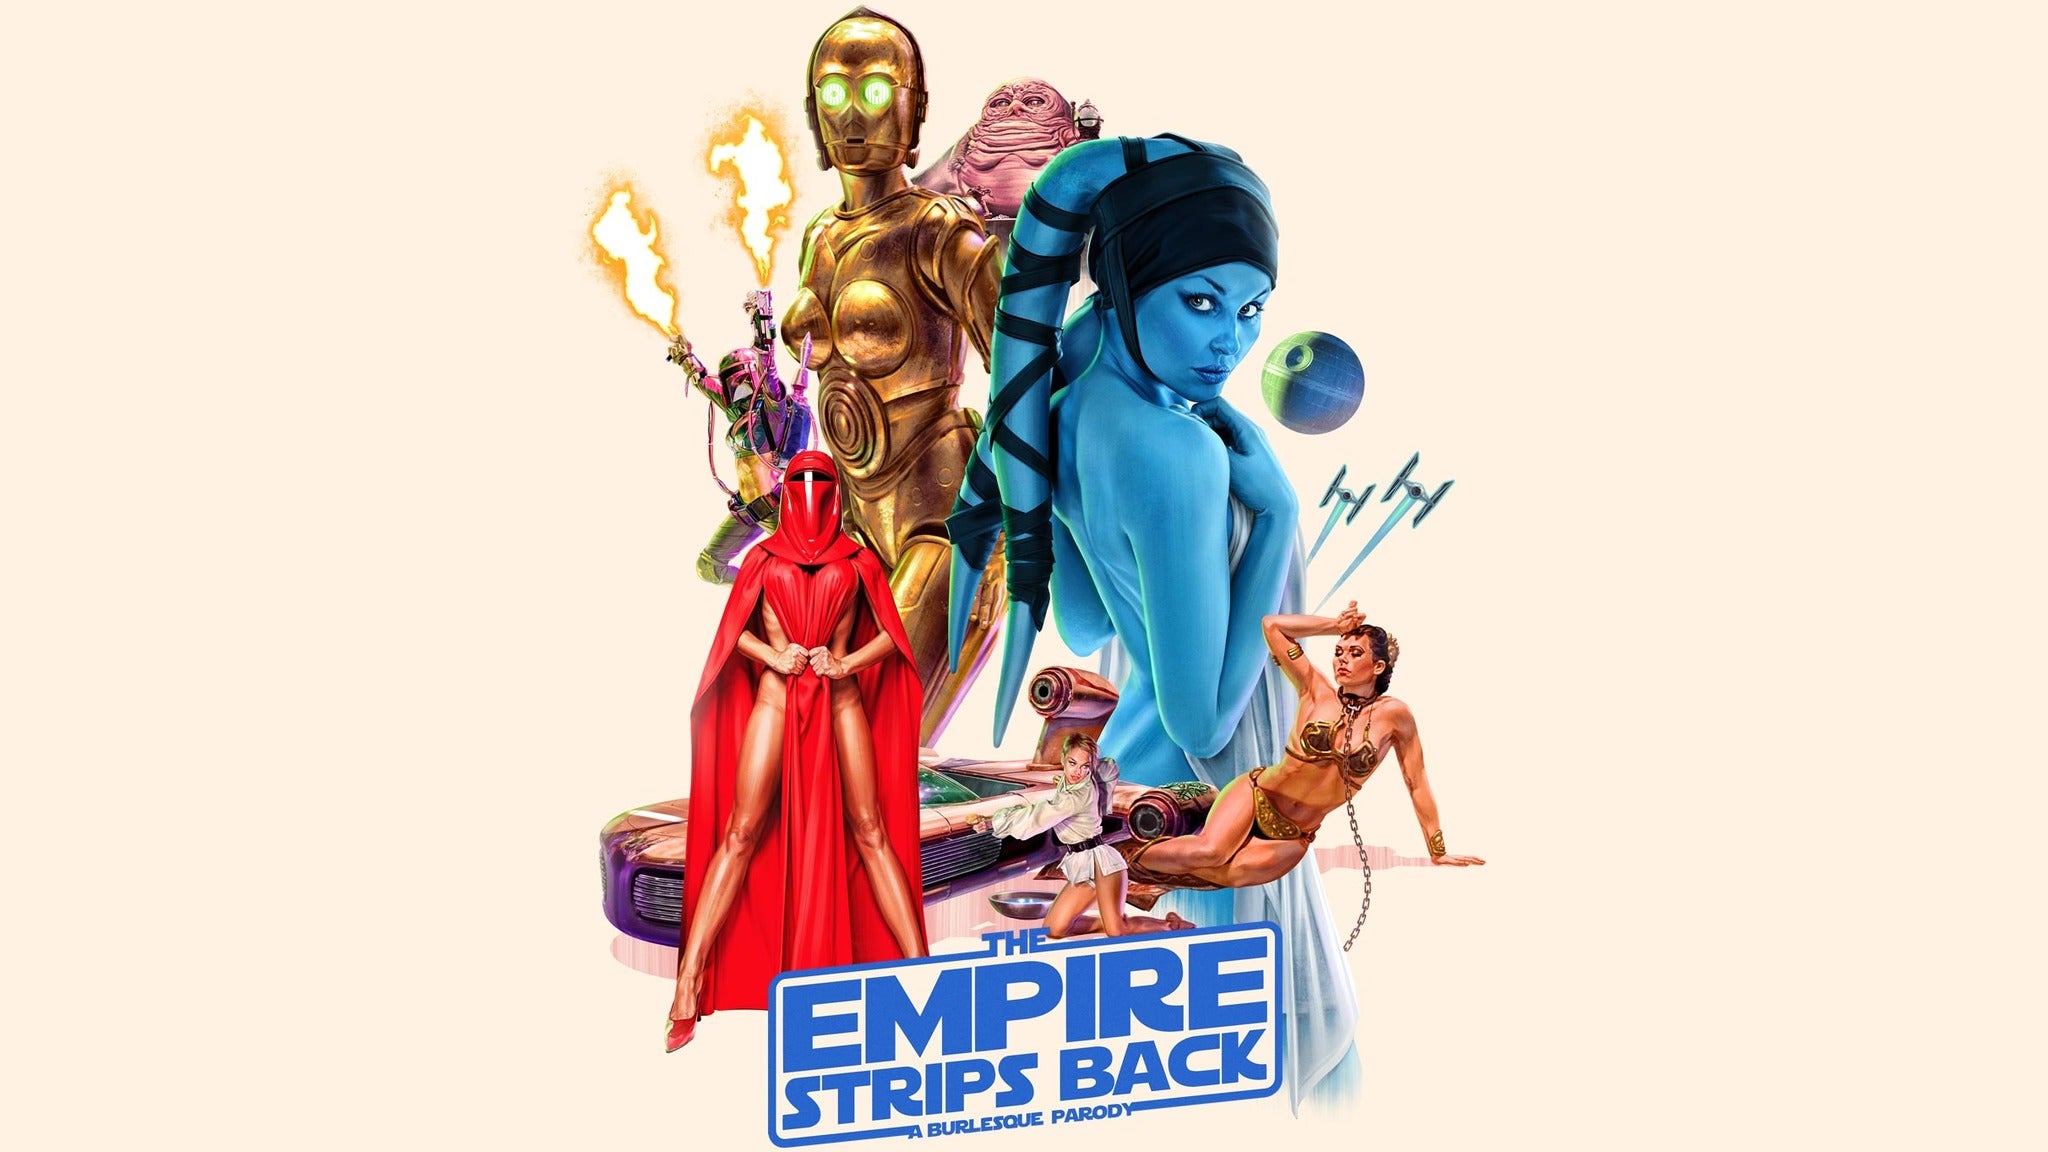 The Empire Strips Back: A Burlesque Parody in Phoenix promo photo for VIP Package presale offer code